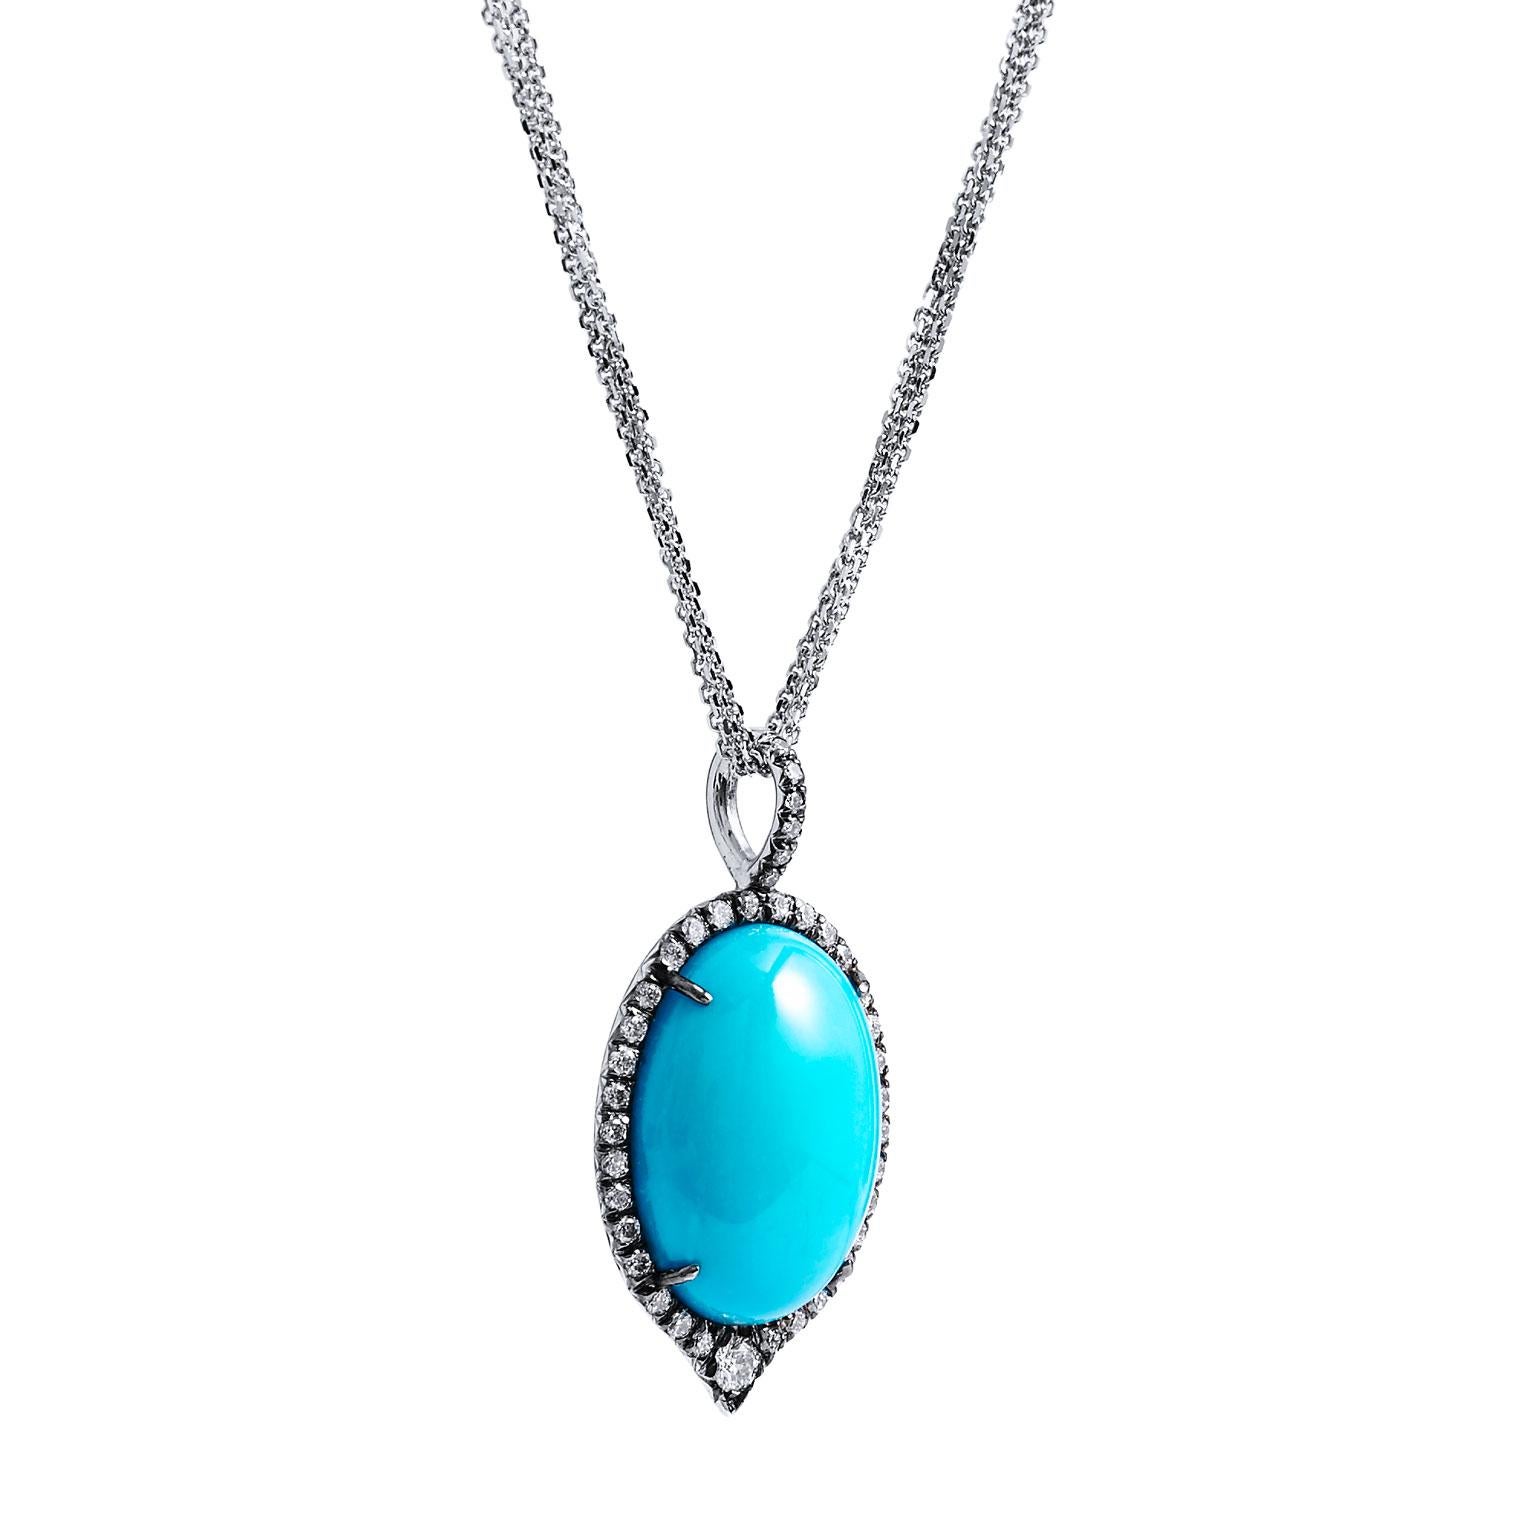 H&H Handmade Turquoise White Gold Diamond Pendant Necklace In New Condition For Sale In Miami, FL